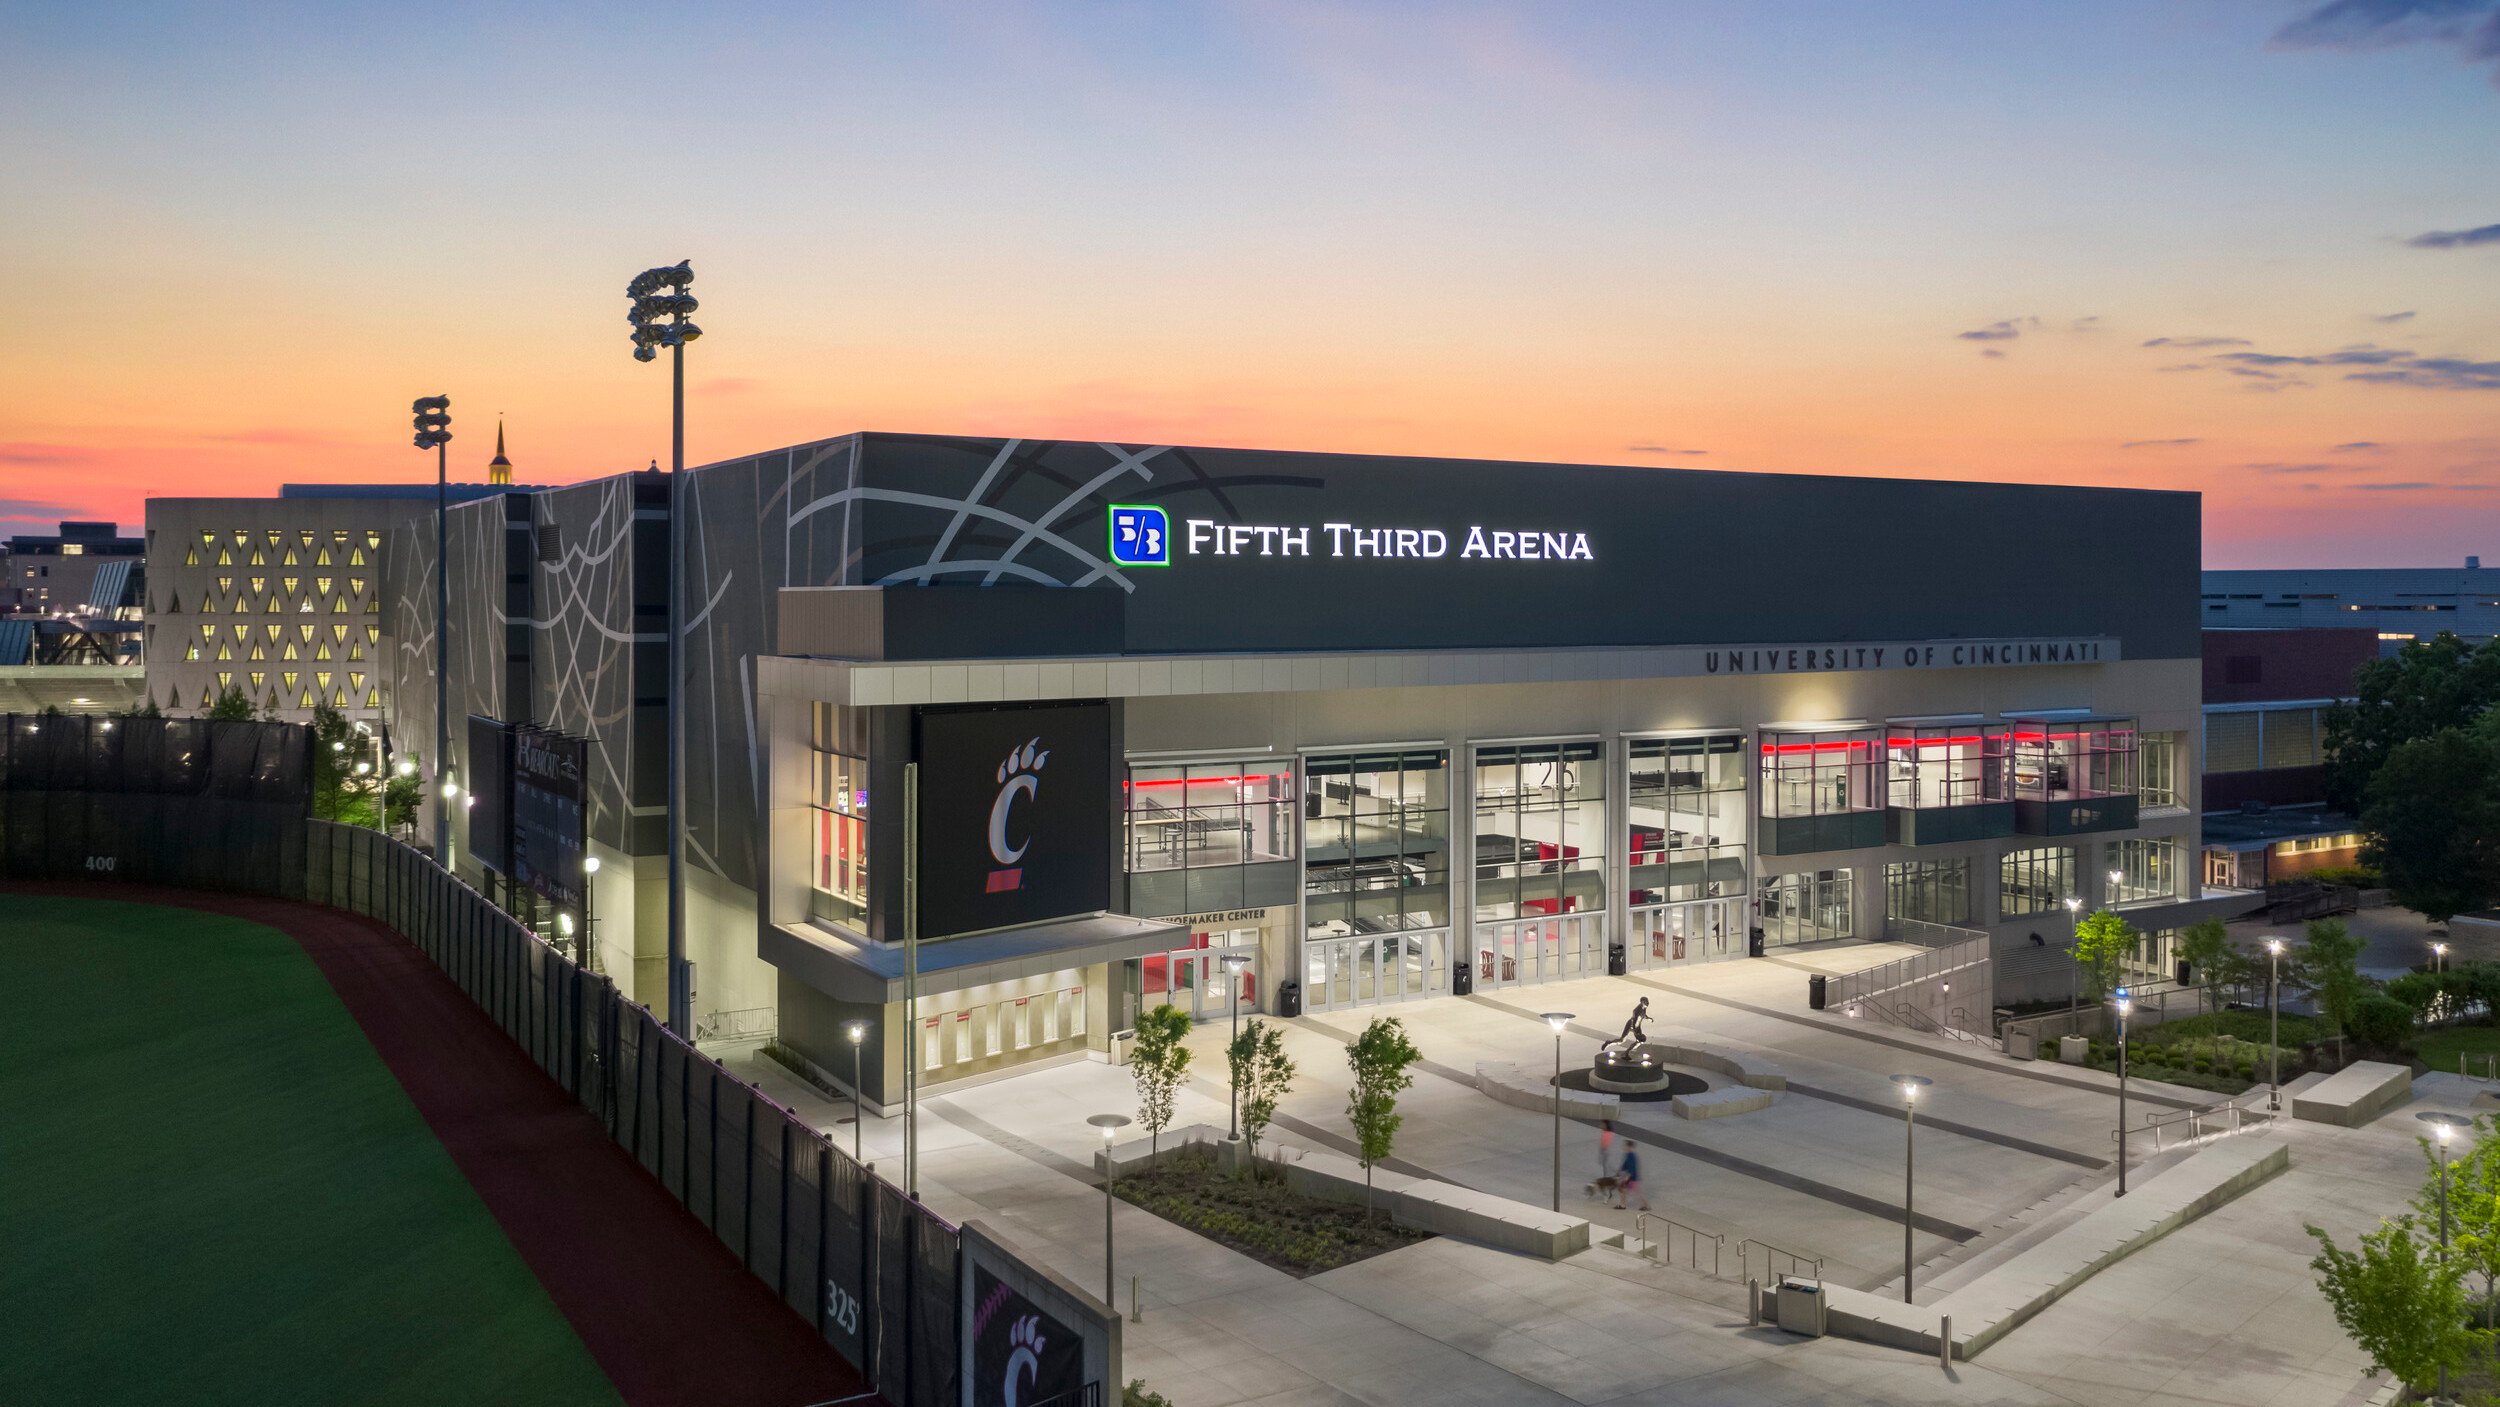 Fifth Third Arena image